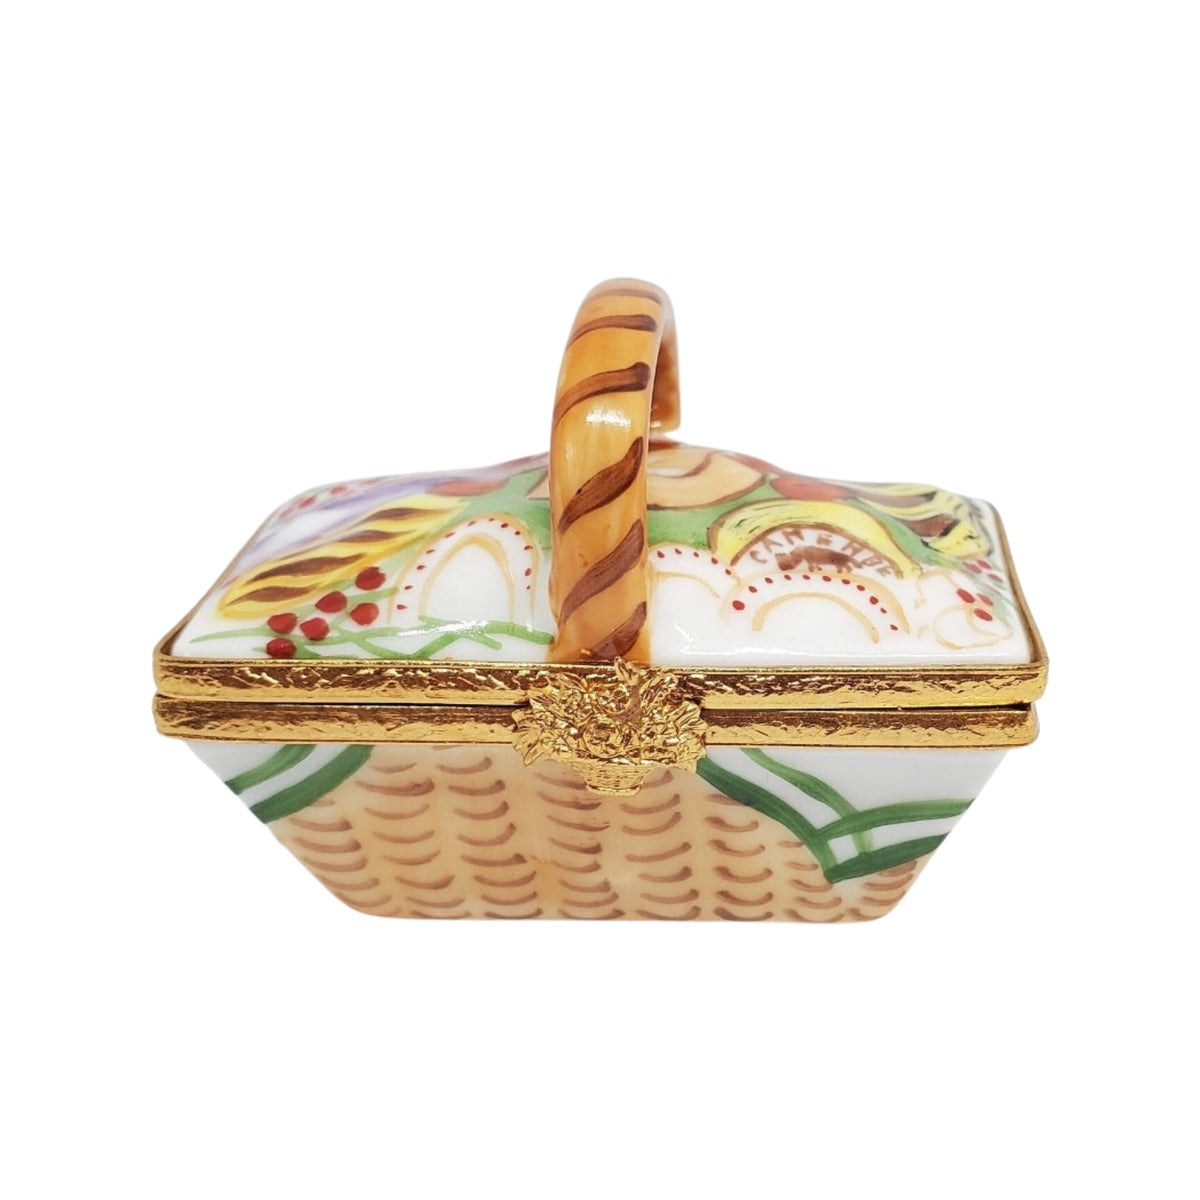 Basket for picnic with red and white checkered lining